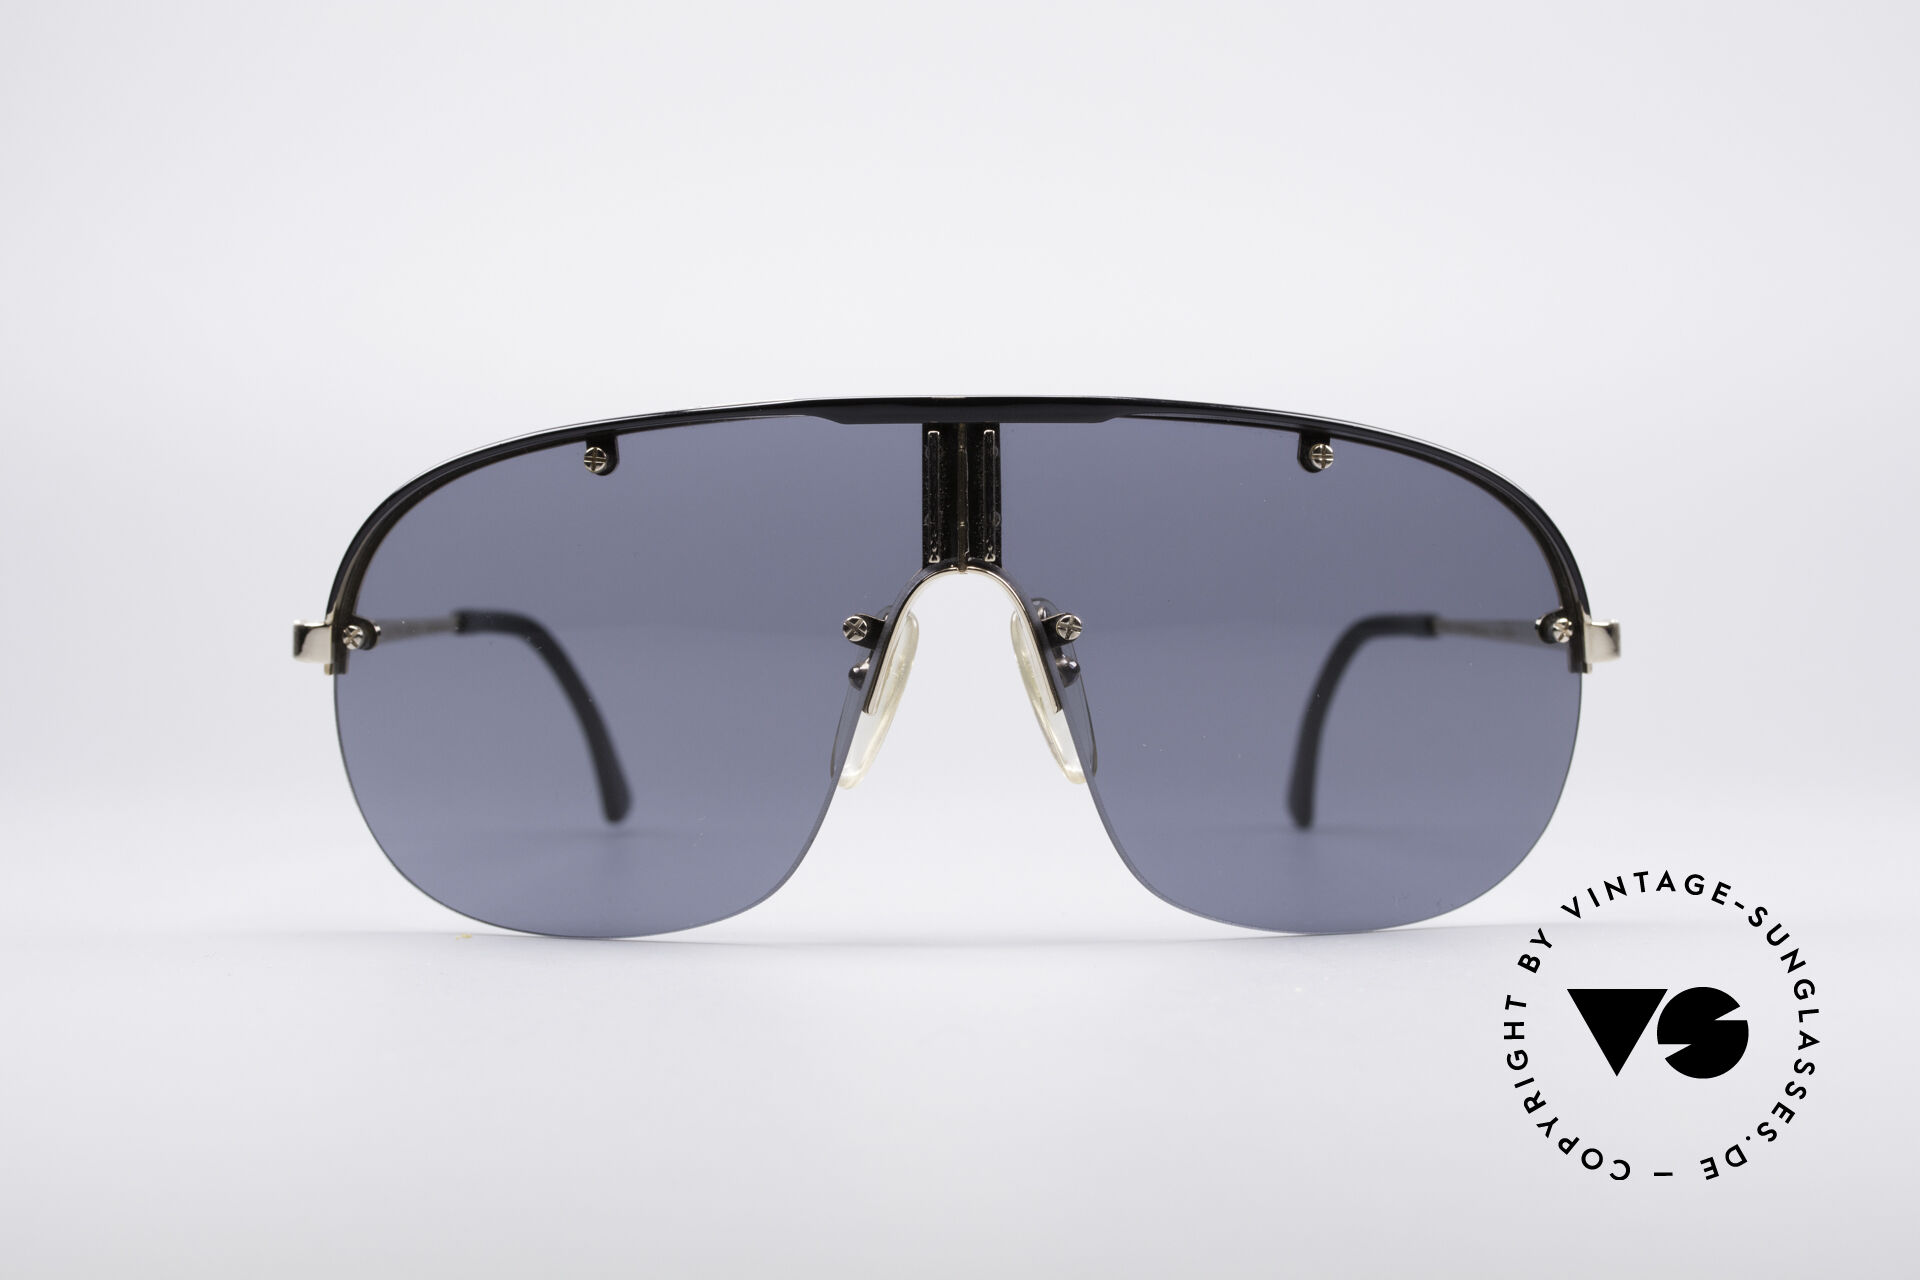 Alfred Dunhill 6036 vintage sunglasses